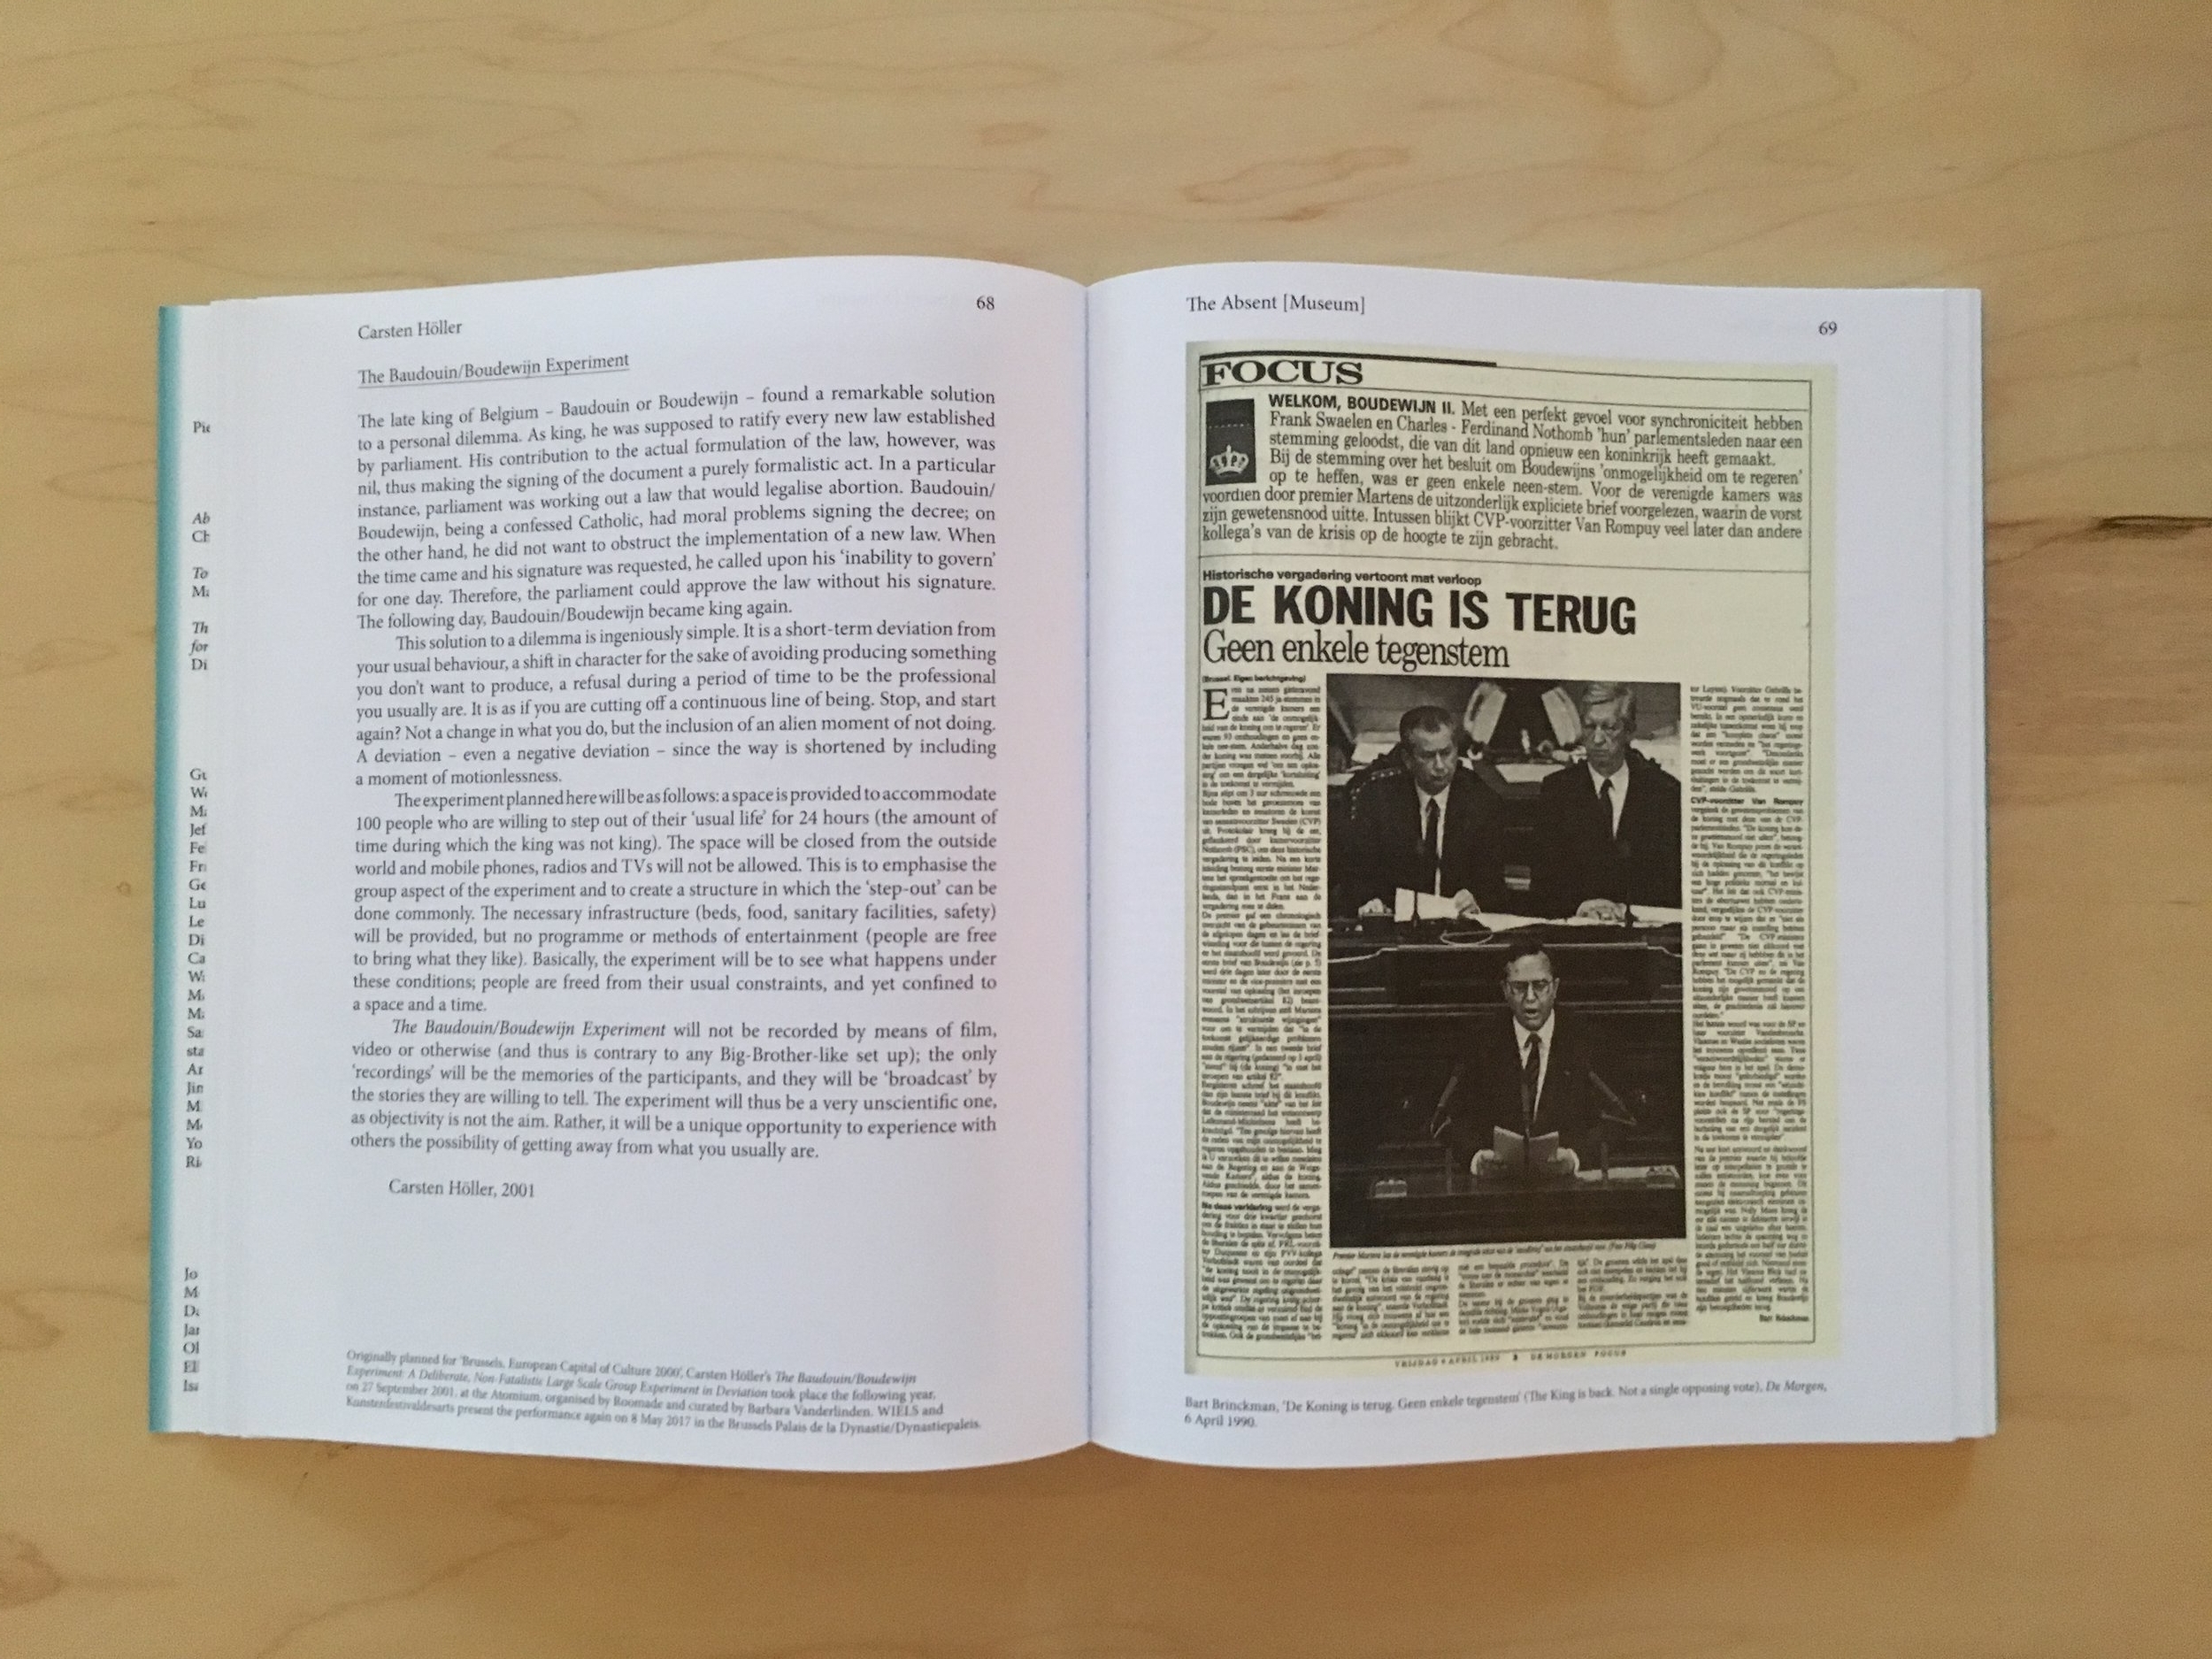  Carsten Höller,&nbsp; Bart Brinckman, “ The King is back. Not a single opposing vote, ”&nbsp;De Morgen , 6 April 1990 , 2001/2017, in&nbsp; The Absent Museum: Blueprint for a Museum of Contemporary Art for the Capital of Europe .&nbsp;Edited by Dirk